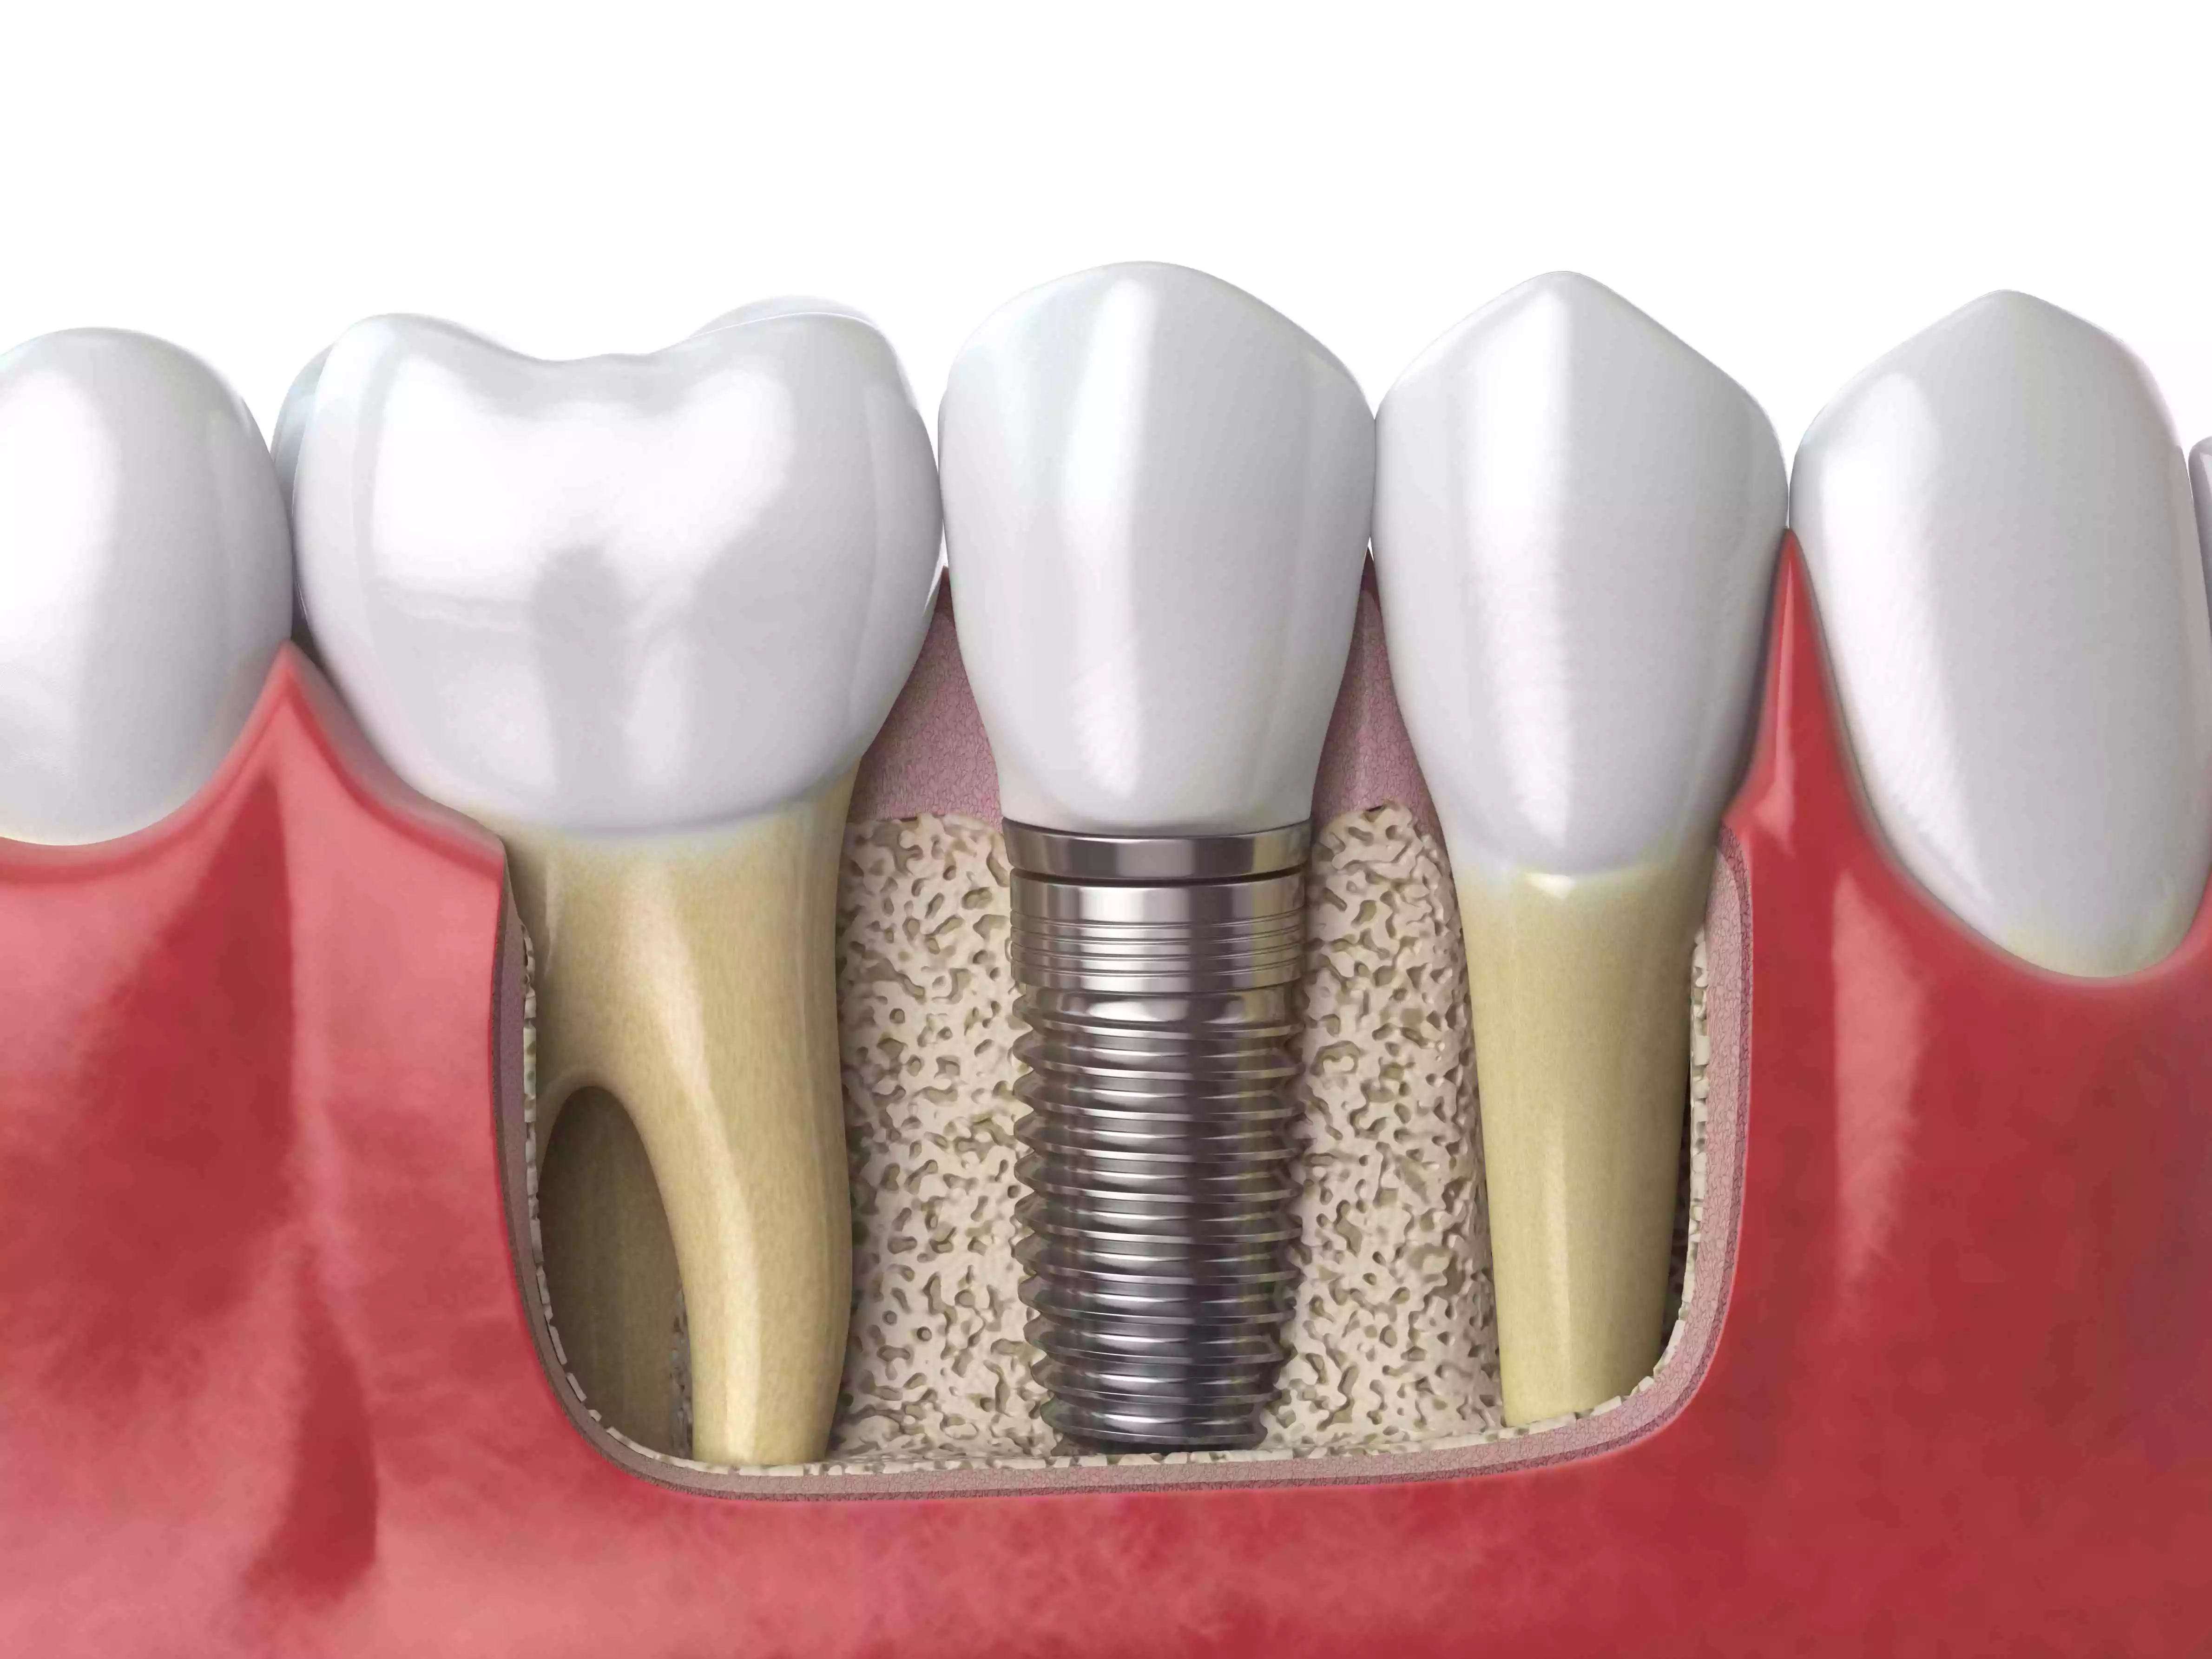 Read more about the article Dental Implant Procedure